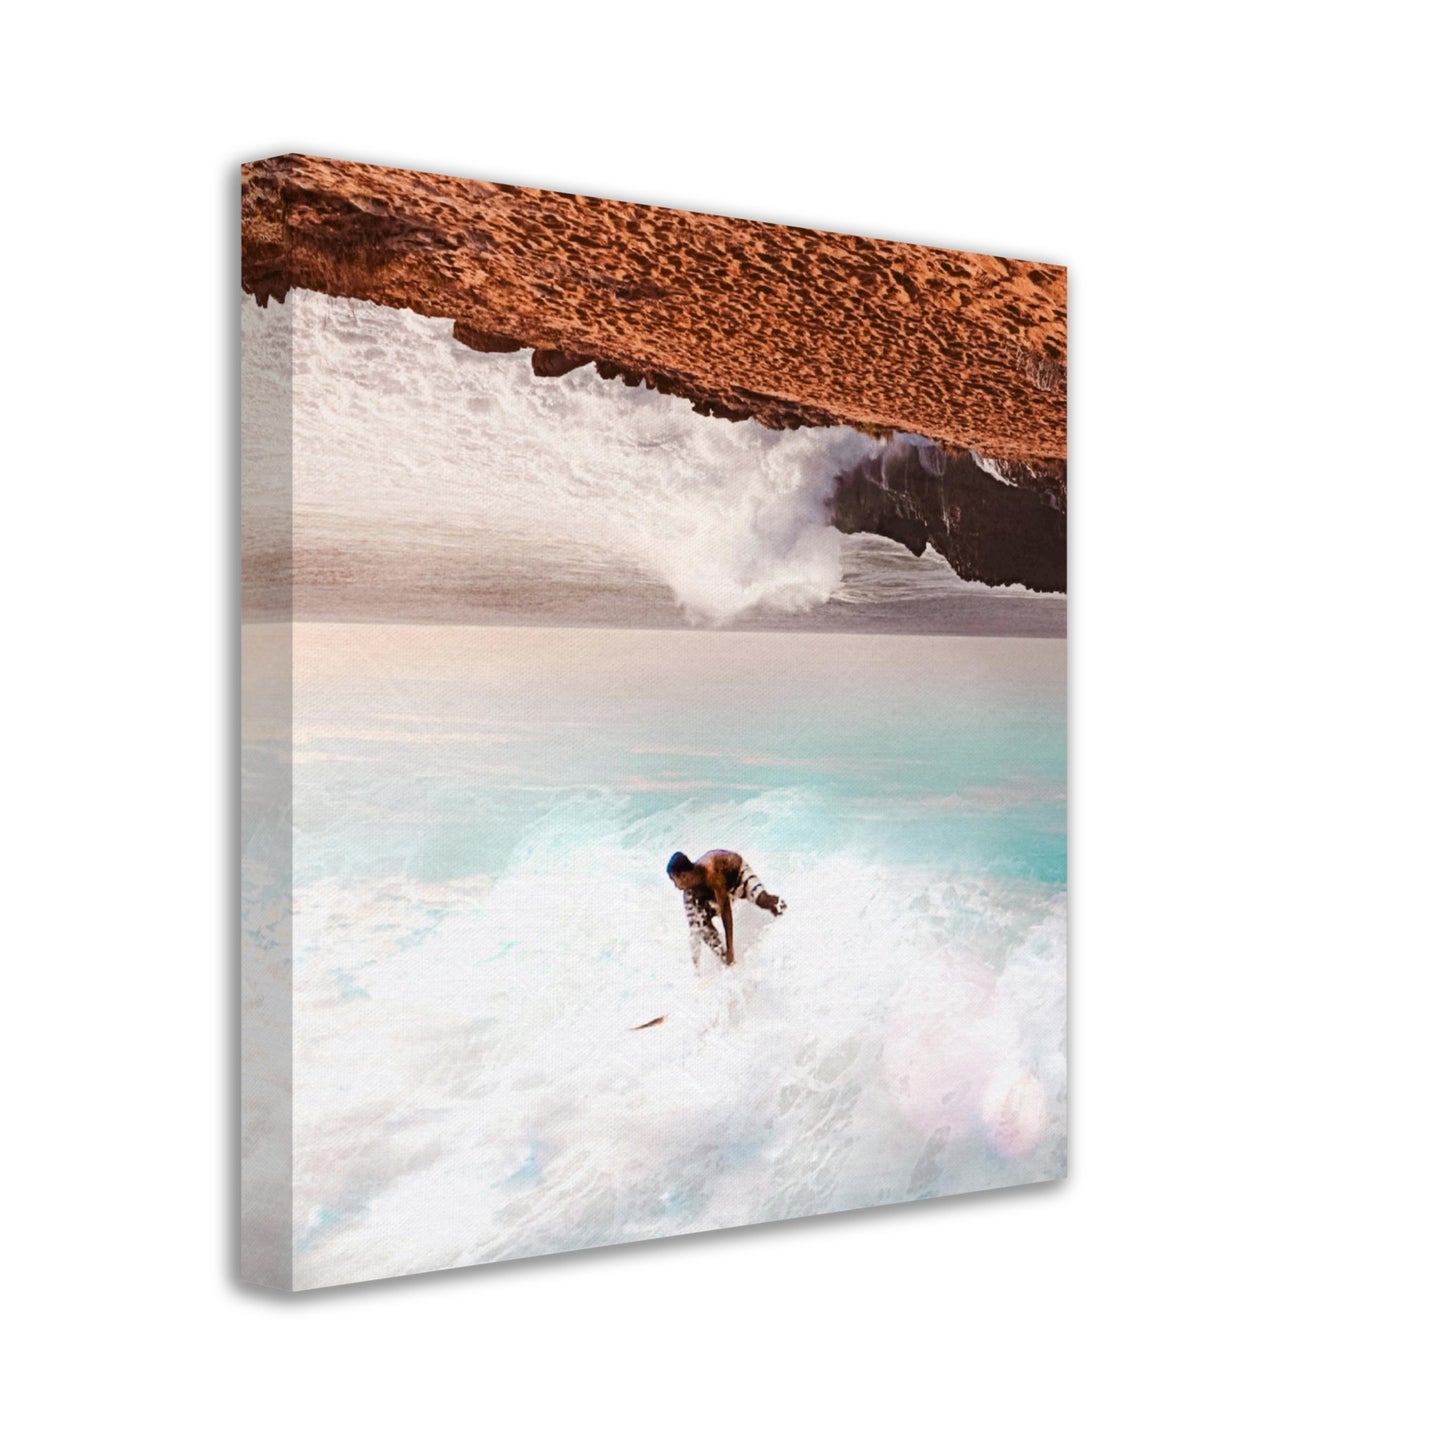 Surf's Up - Canvas Print